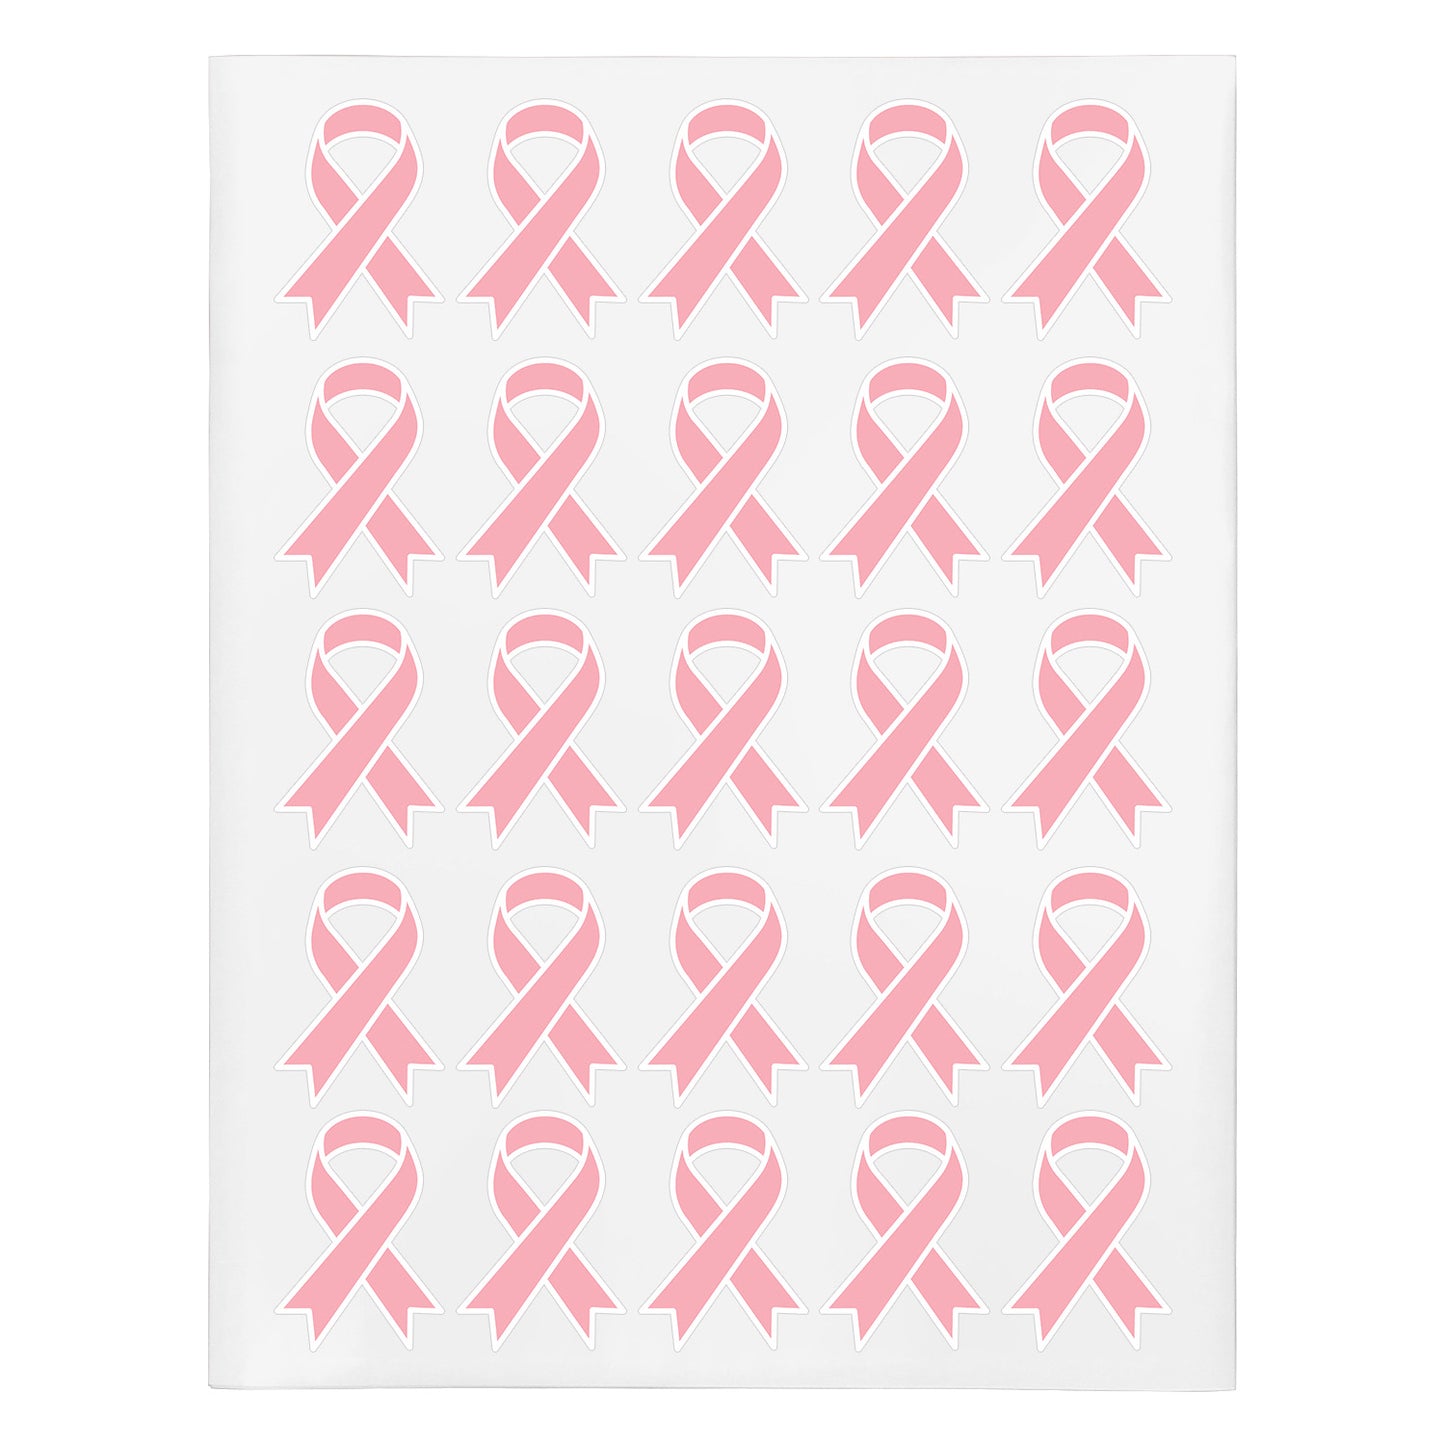 2.2 x 1.6 inch | Awareness: Breast Cancer Awareness Ribbon Stickers